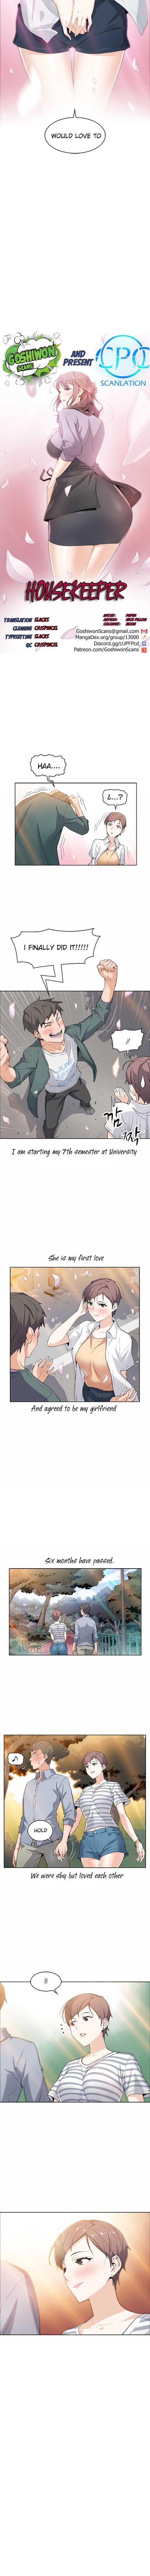 Leggings Housekeeper [Neck Pillow, Paper] Ch.49/49 [English] [Manhwa PDF] Completed Vadia - Page 3